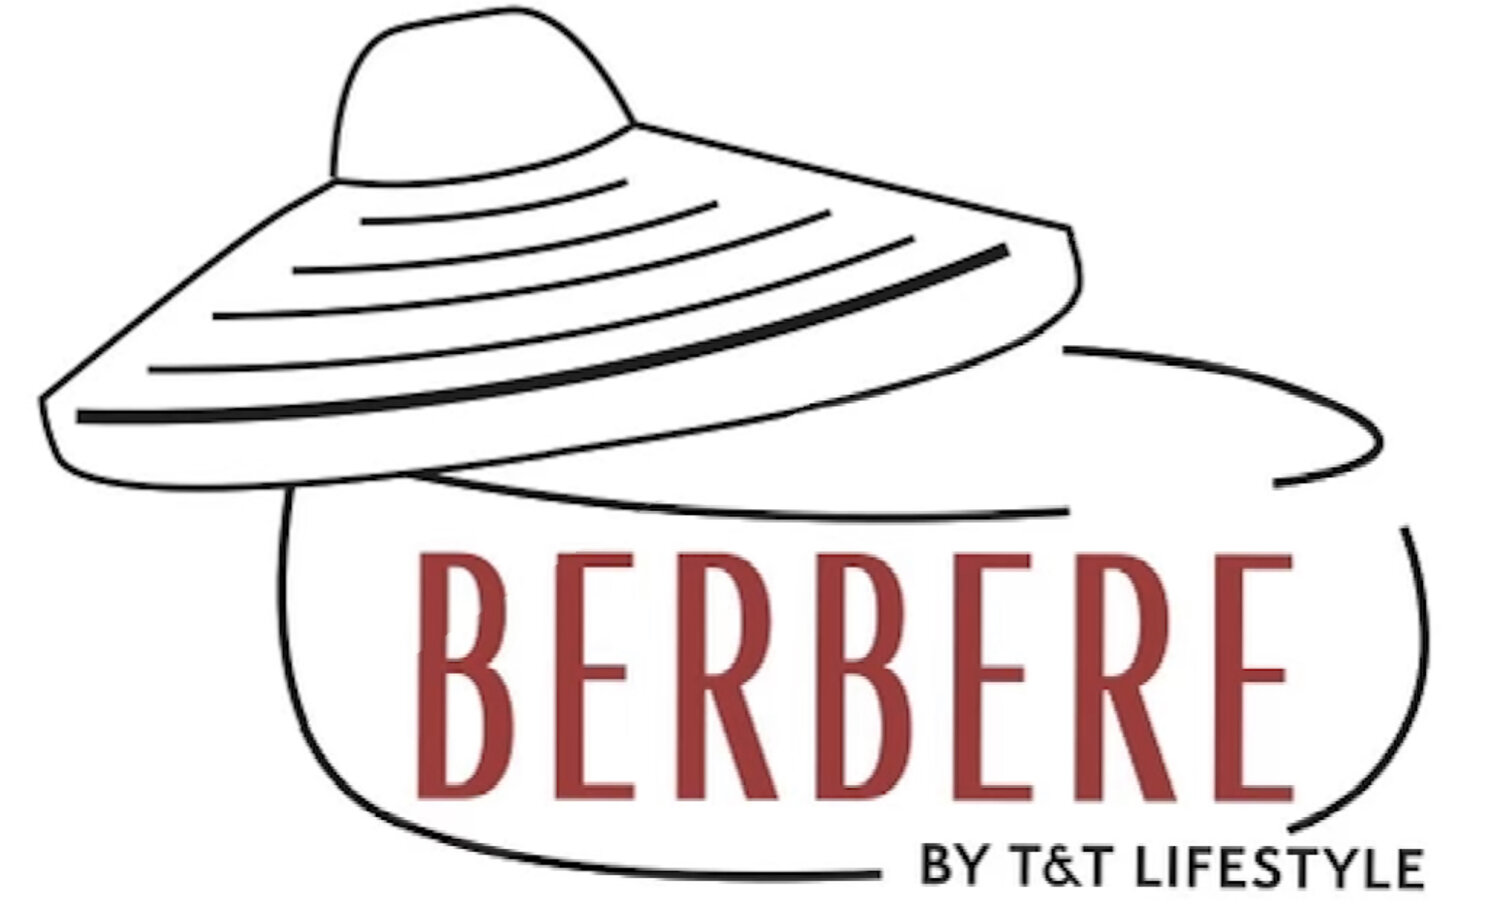 BERBERE by T&T Lifestyle